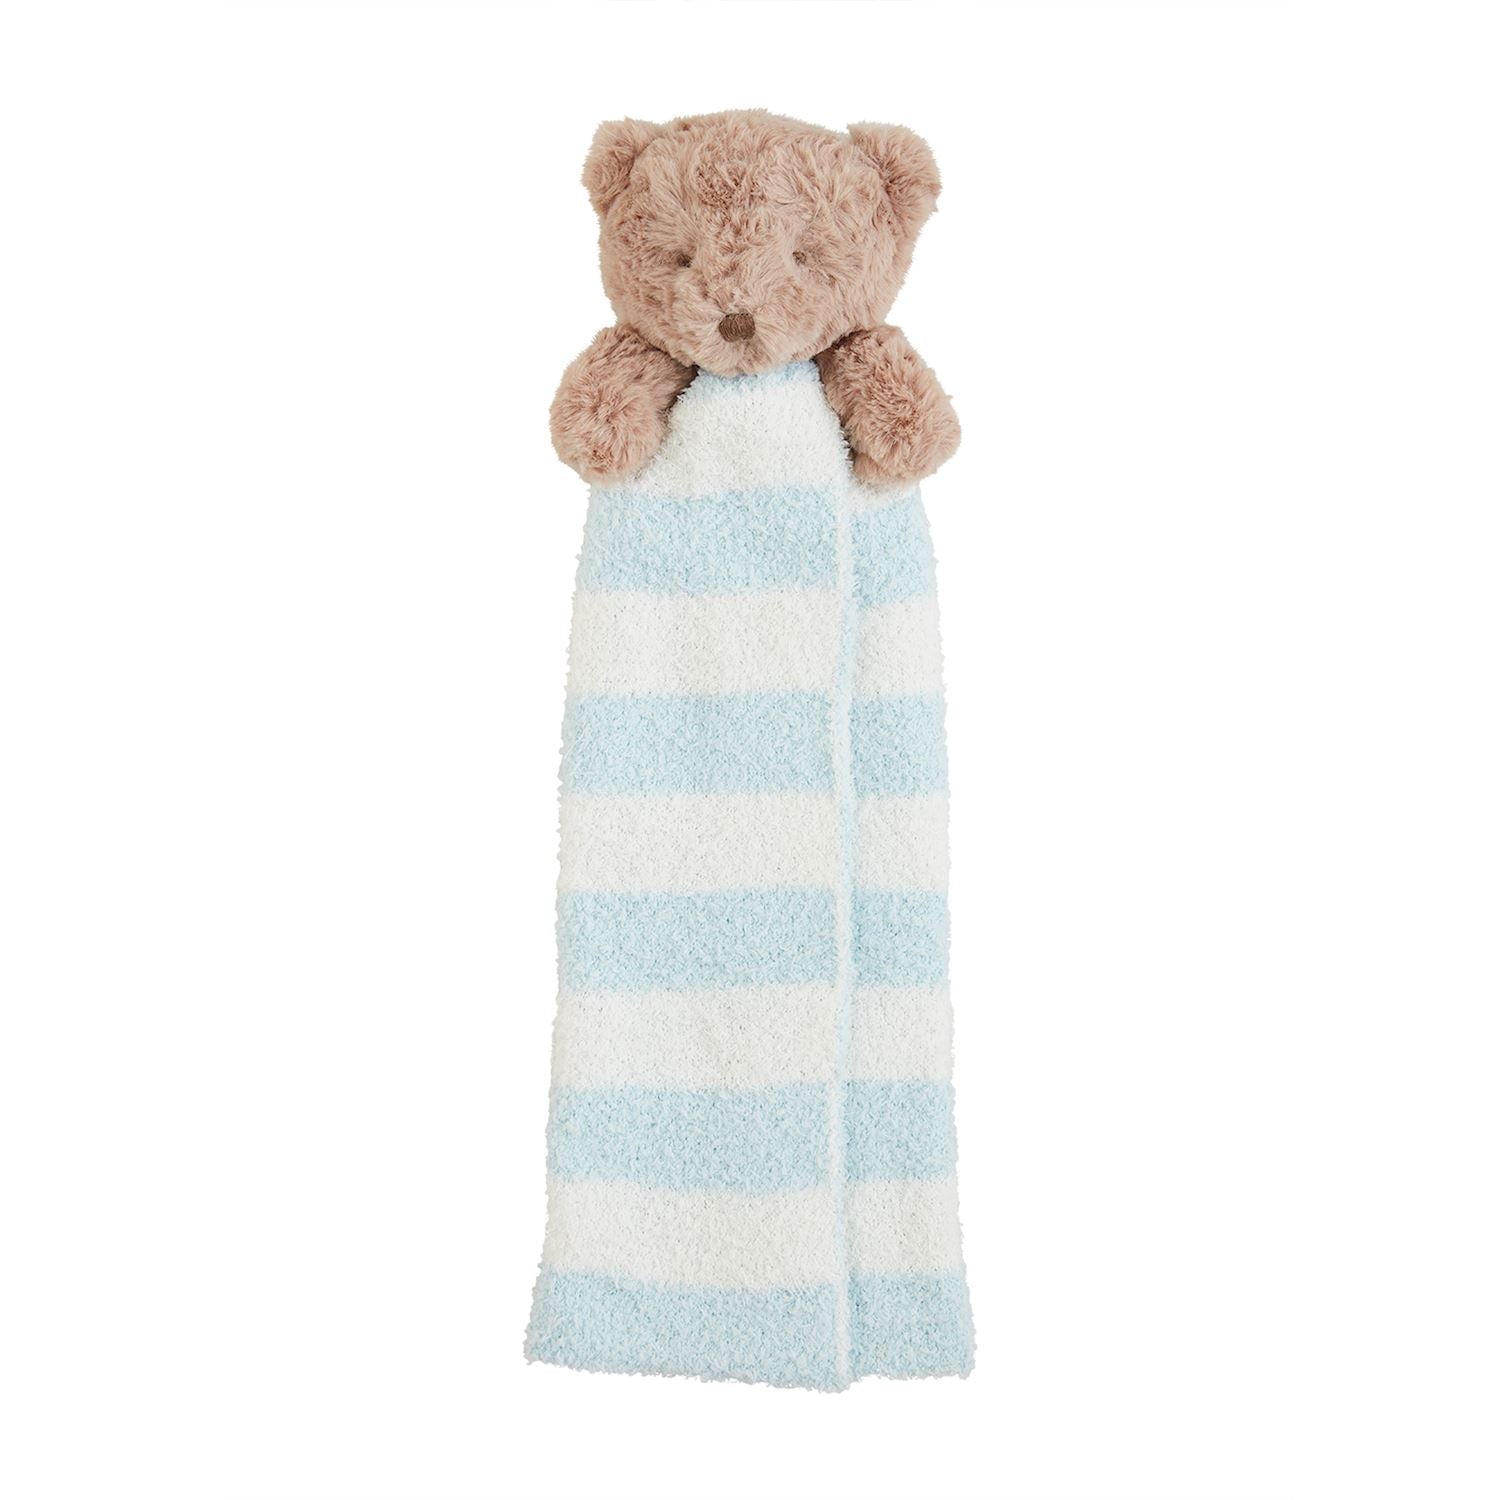 Blue Scallop Bear Cuddle Pal Lovey Blanket - Baby Blossom Company